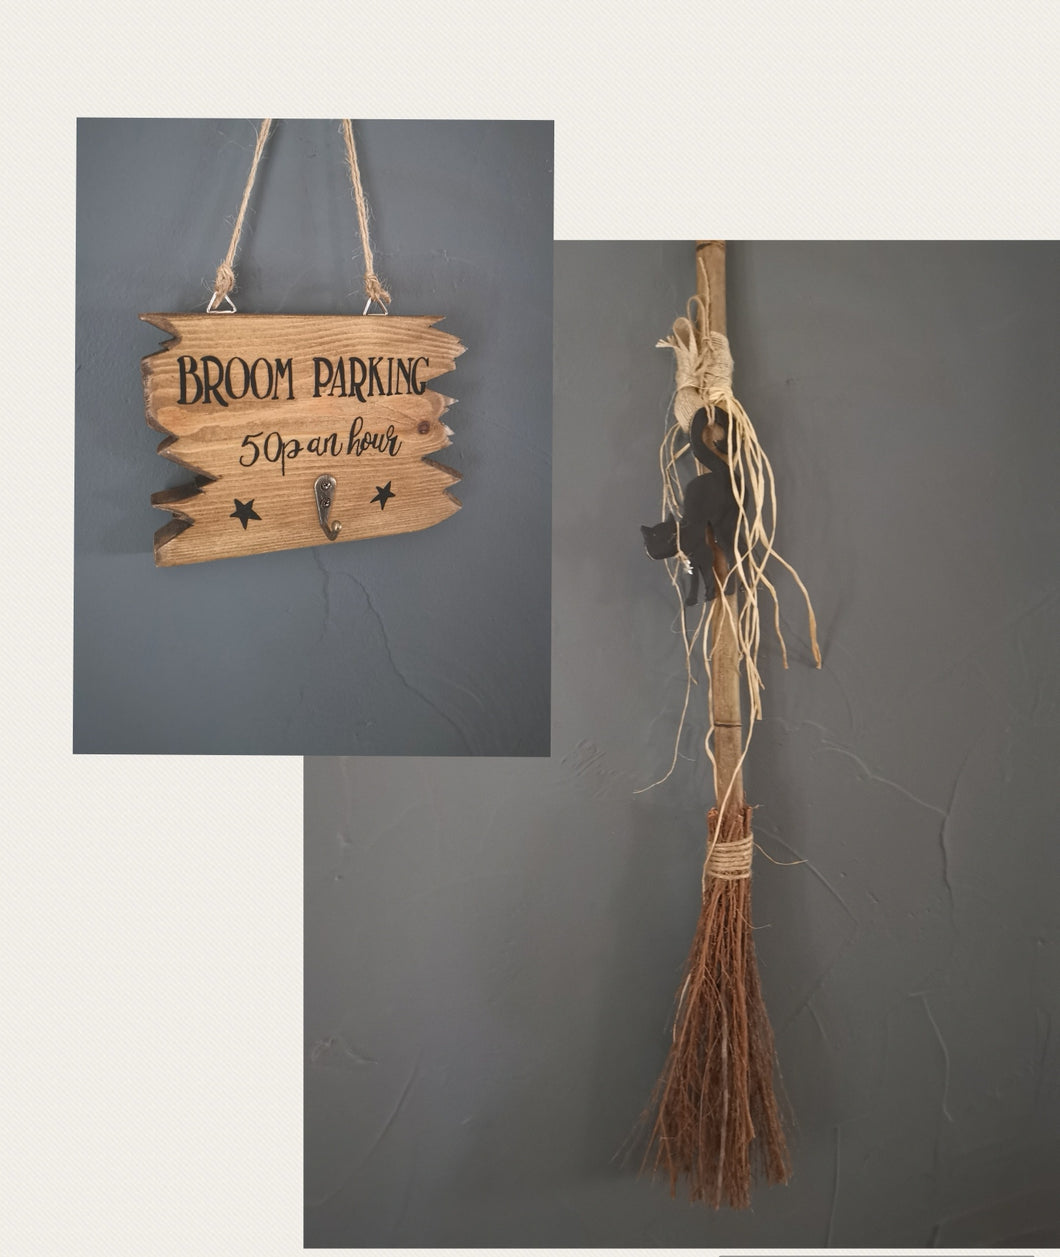 Broomstick with sign and black cat